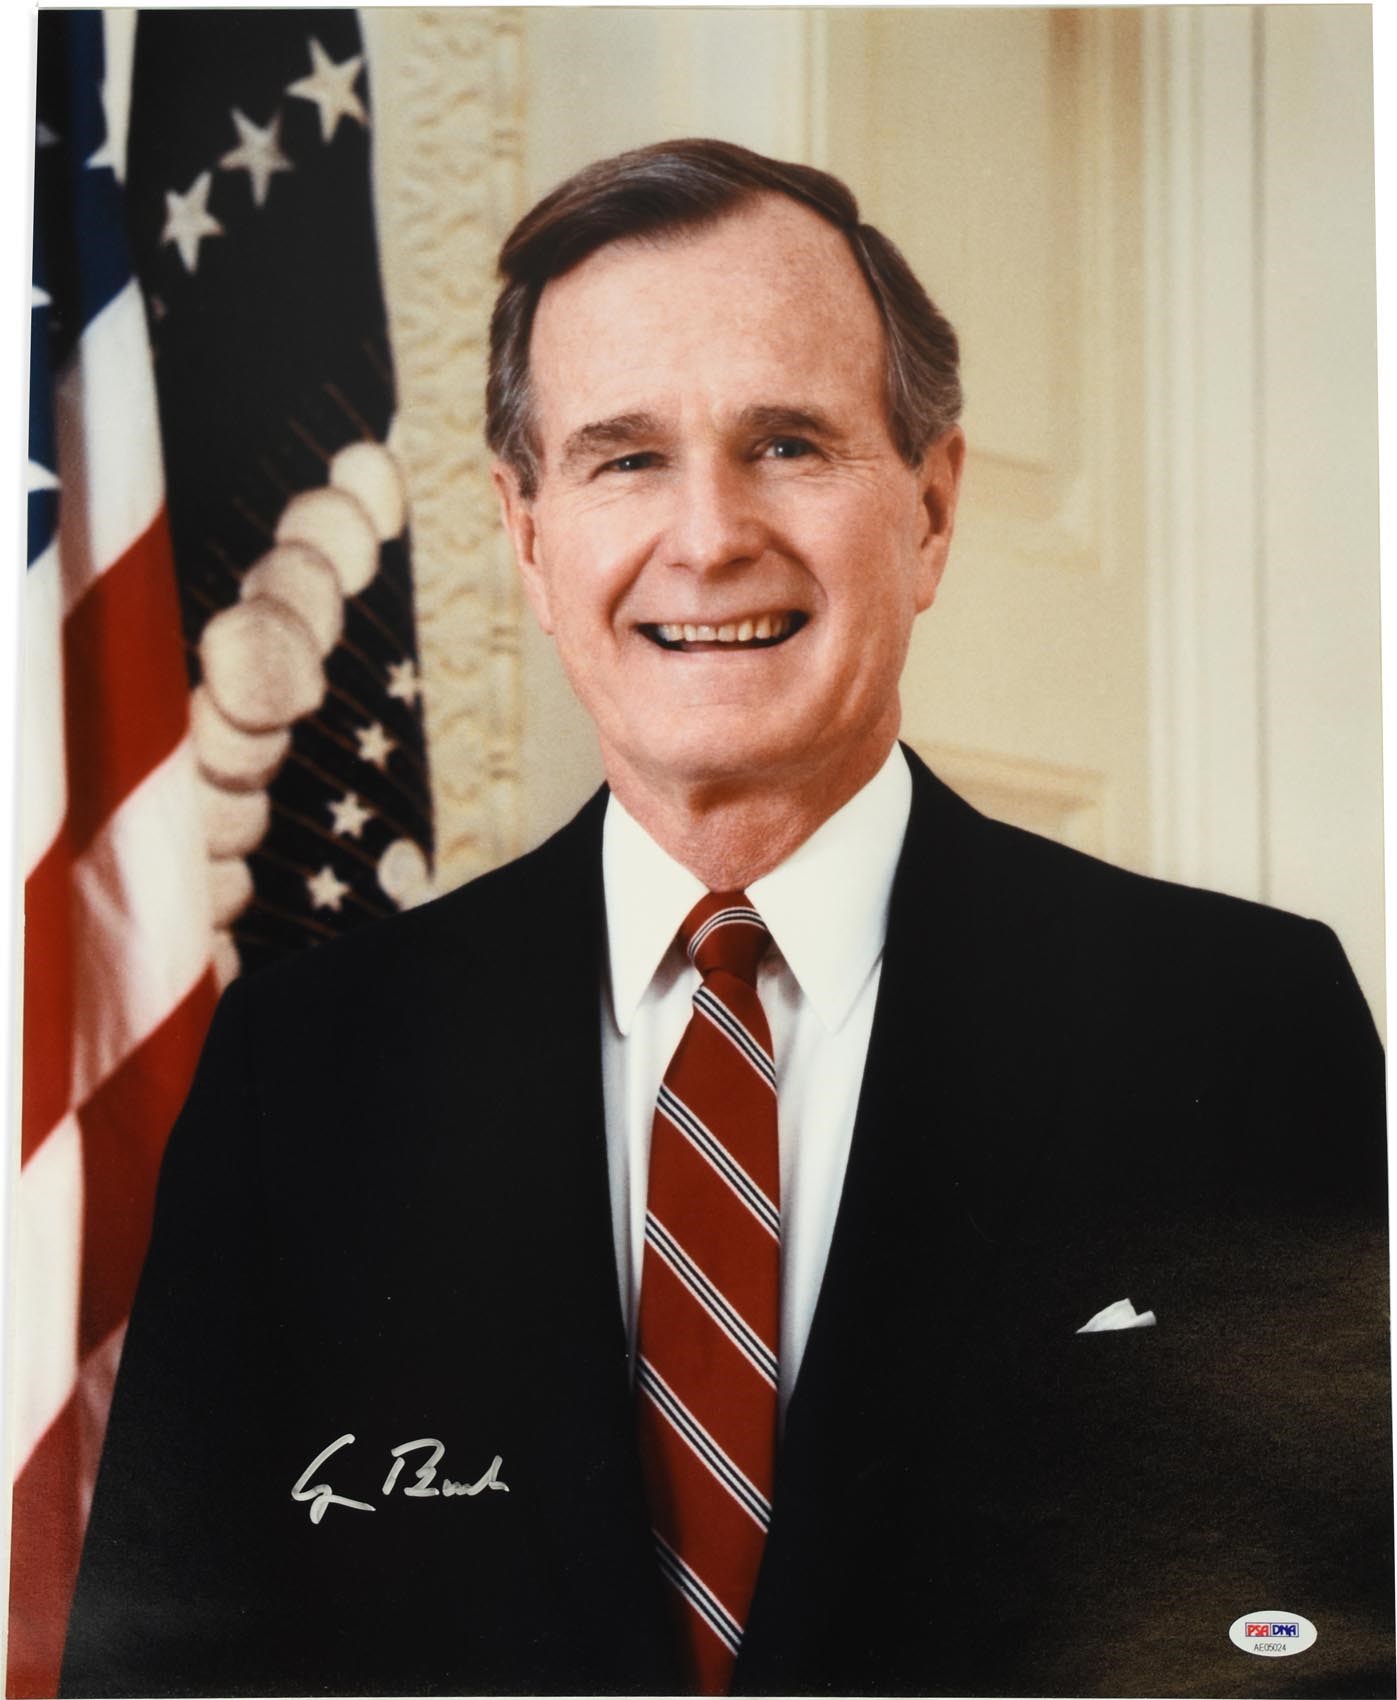 Rock And Pop Culture - George H. W. Bush Oversized Signed Photo (PSA)